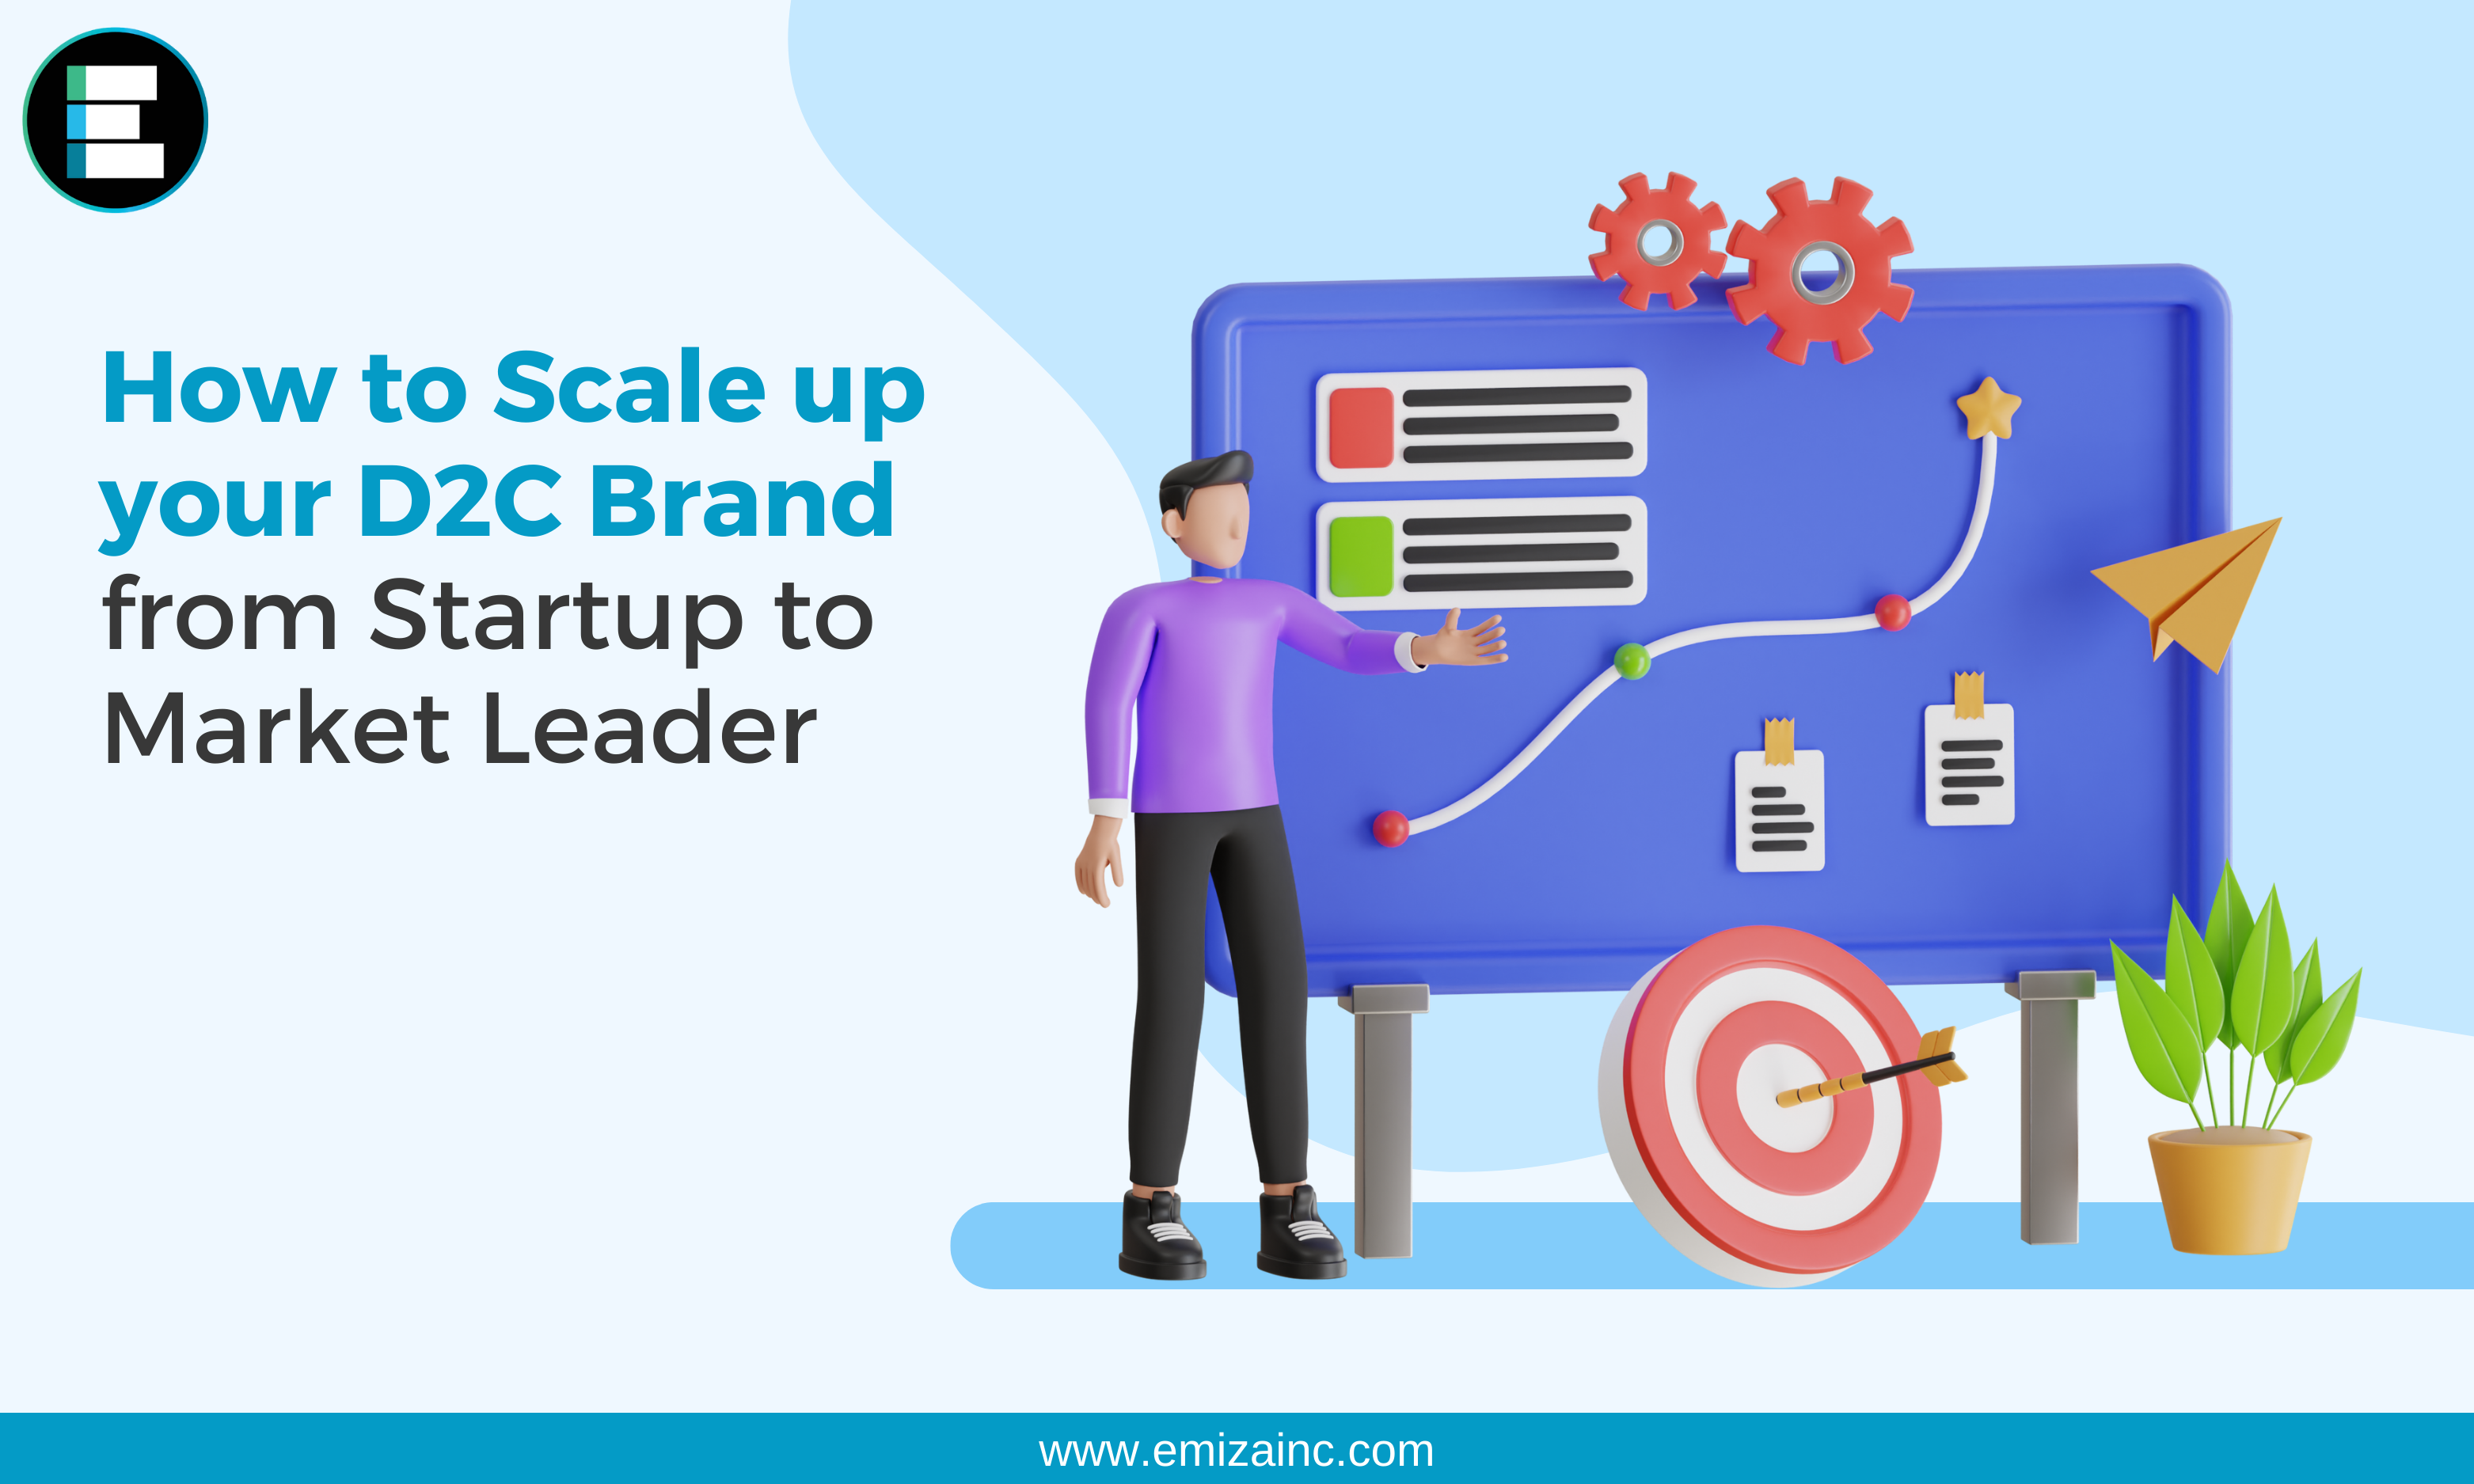 How to scale up Your D2C Brand from Startup to Market Leader